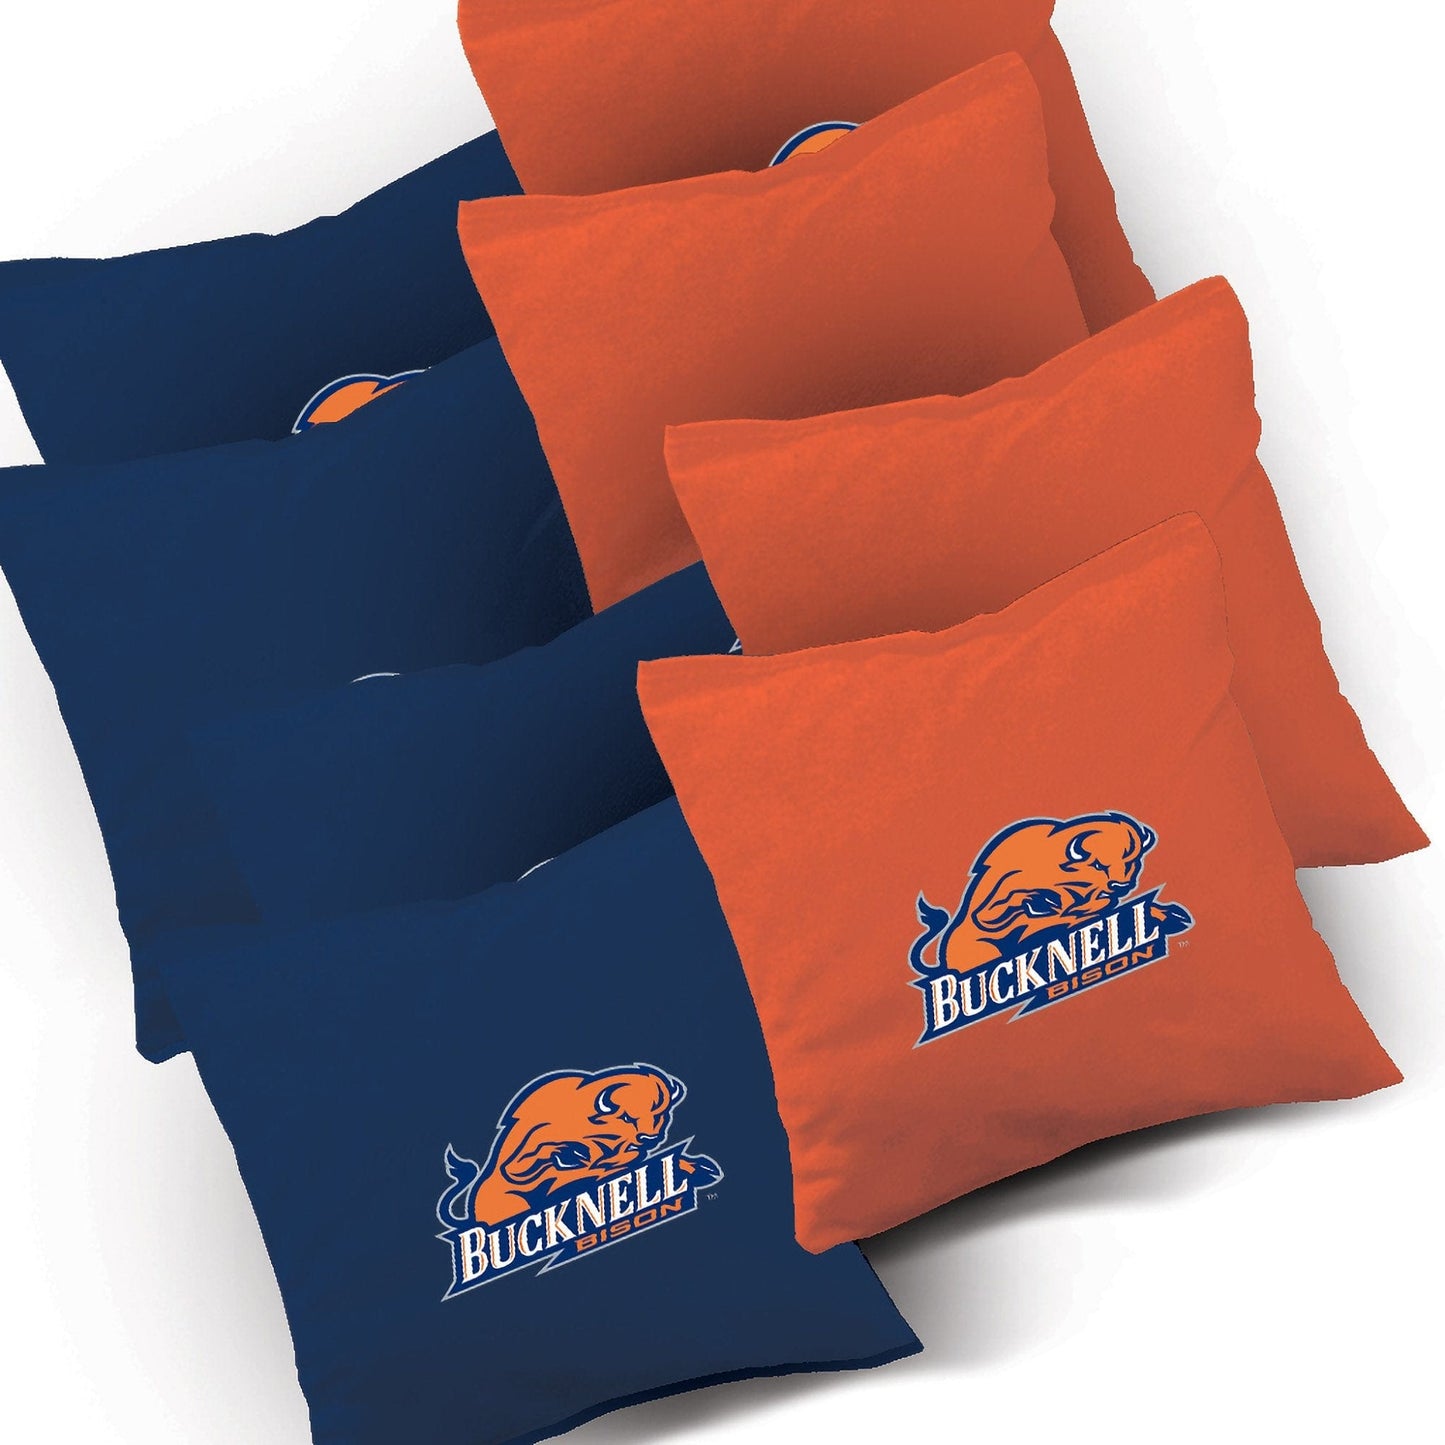 Bucknell Stained Pyramid team logo bags